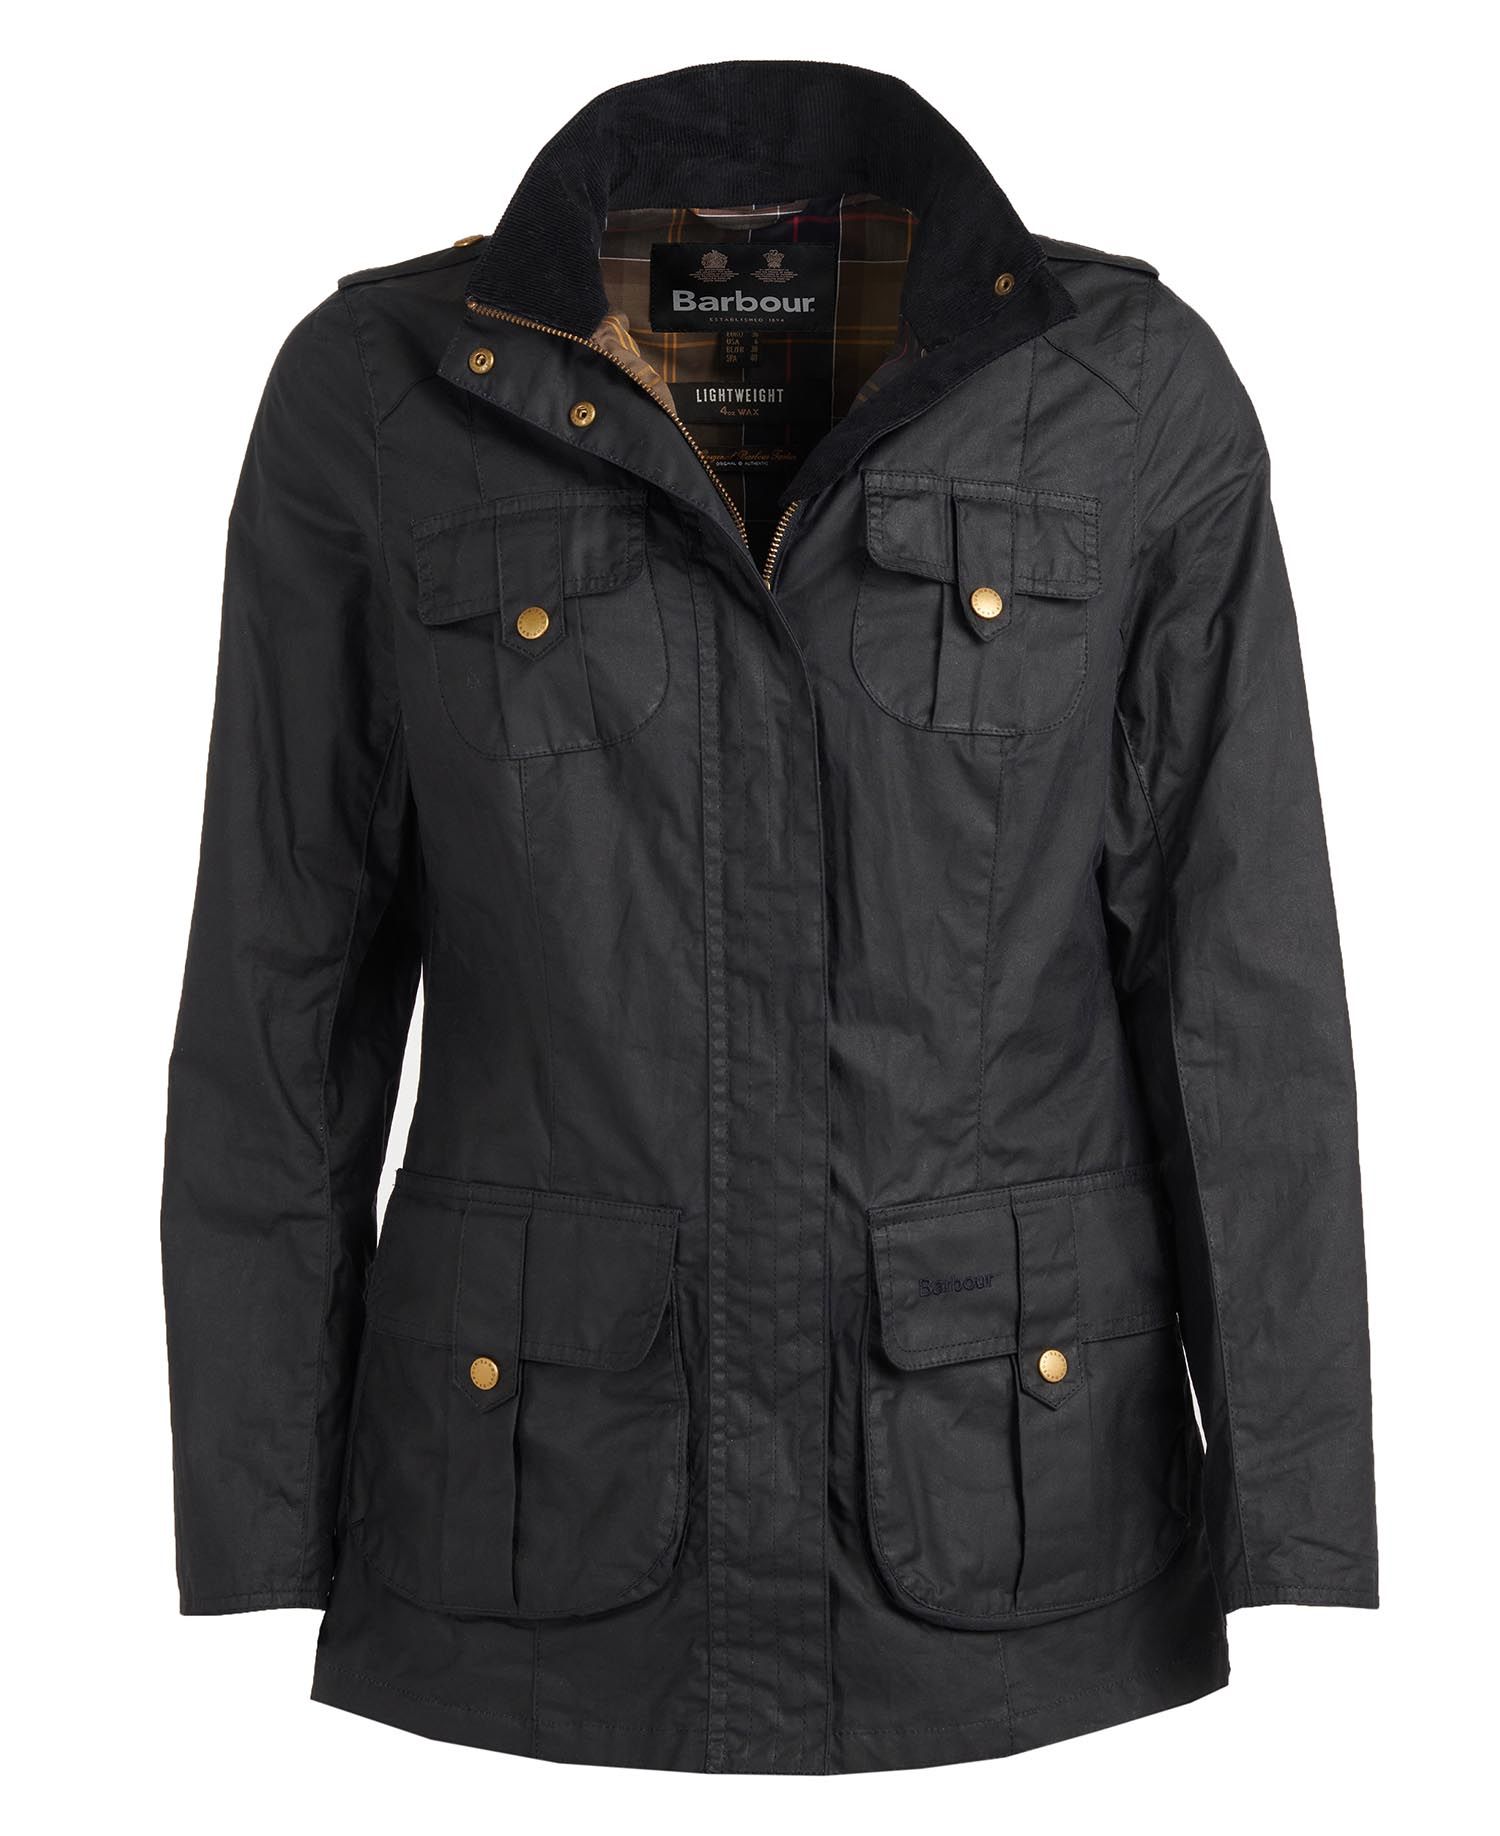 Barbour Lightweight Defence Waxed Cotton Jacket in Navy | Barbour